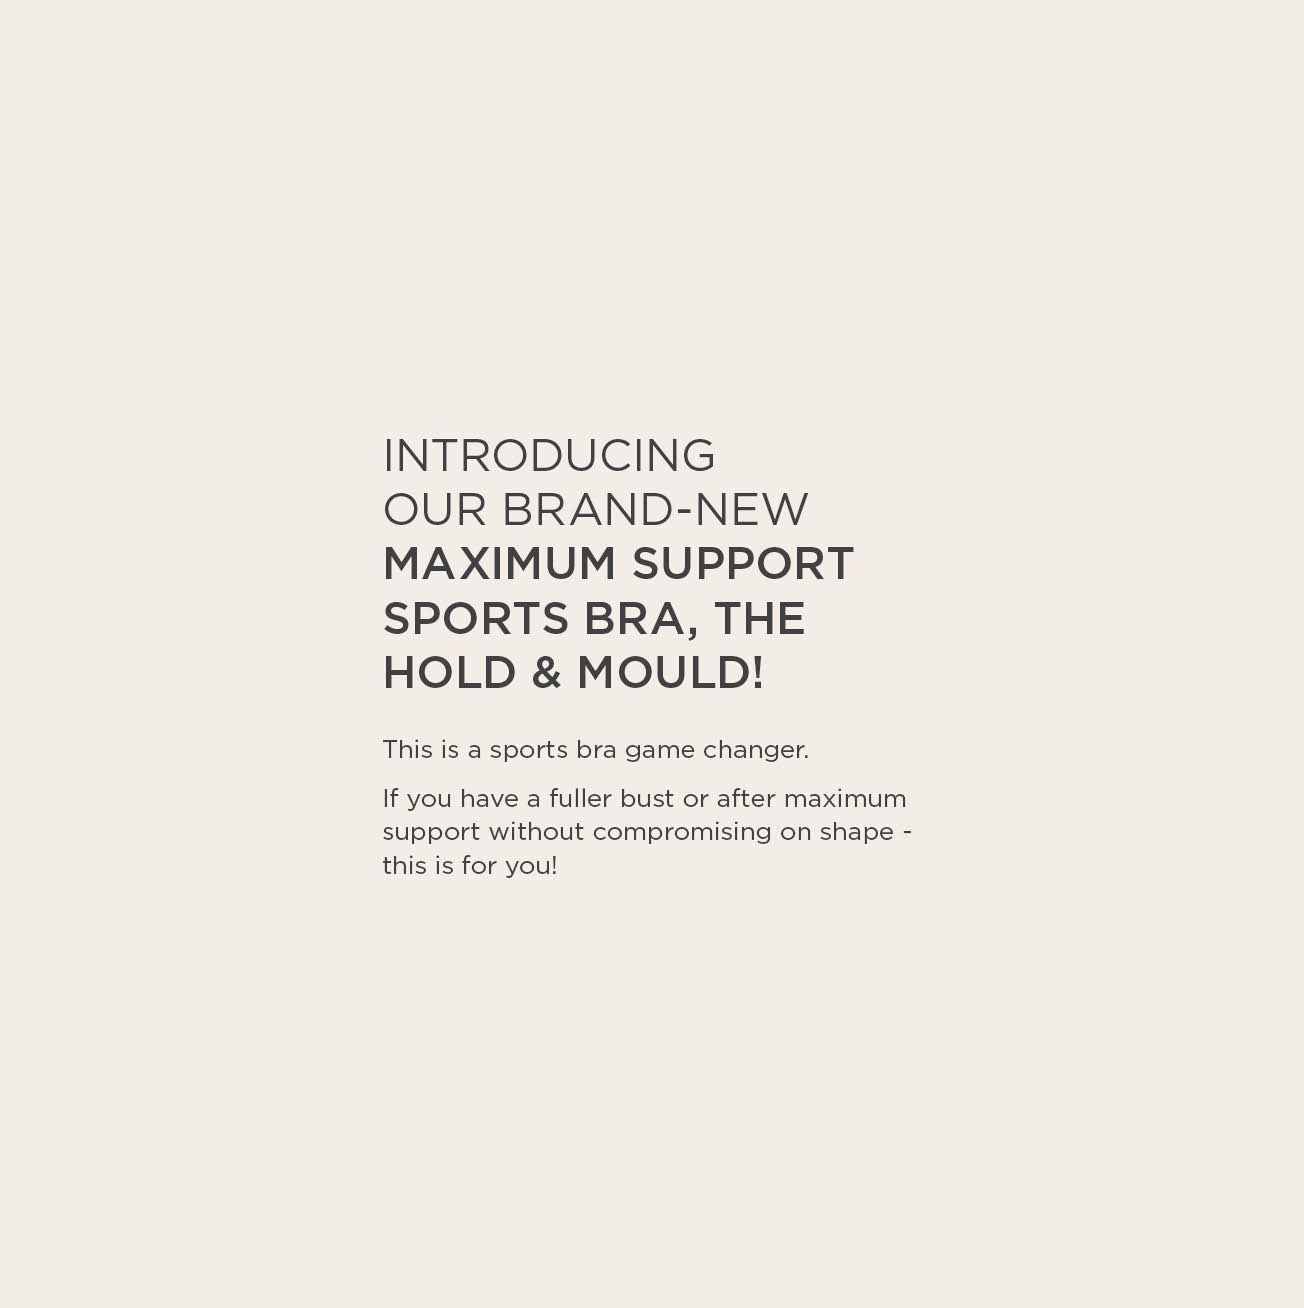 Introducing our brand new maximum support sports bra, the hold and mould! If you have a larger bust or after maximum support without compromising on shape, this is for you.